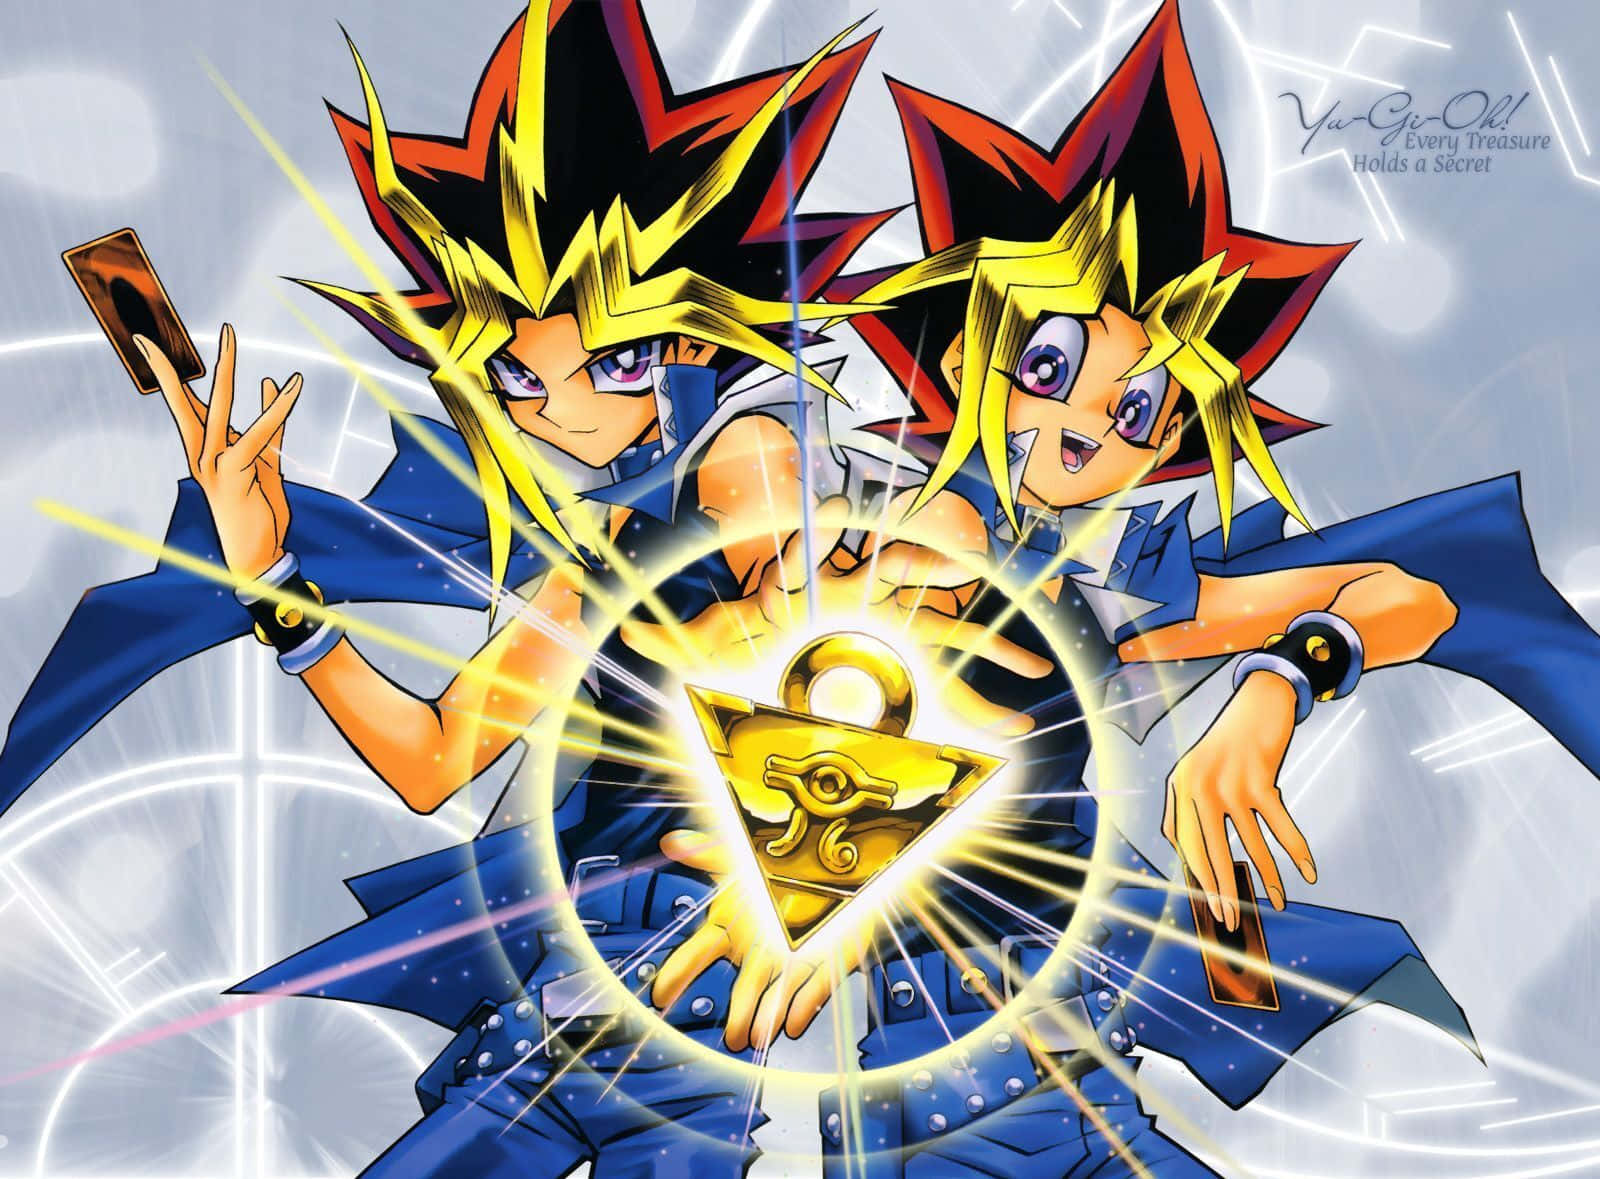 Yugi Muto ready for action in Yu-Gi-Oh! Duel Wallpaper